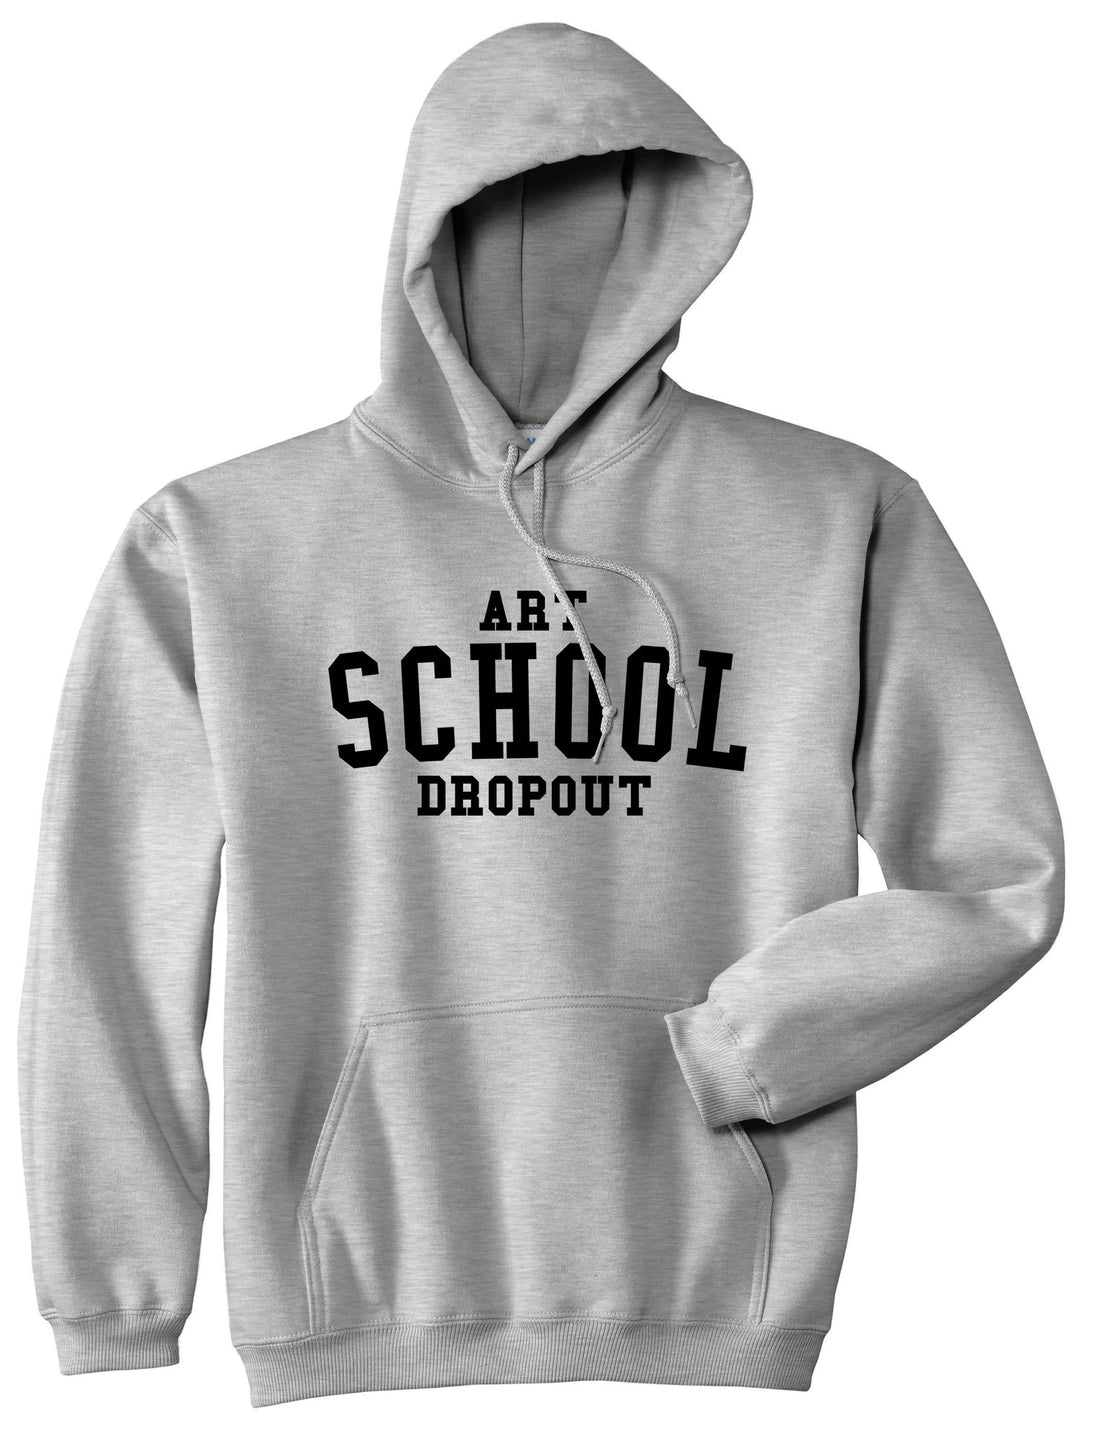 Art School Dropout College Fashion High Boys Kids Pullover Hoodie Hoody in Grey By Kings Of NY